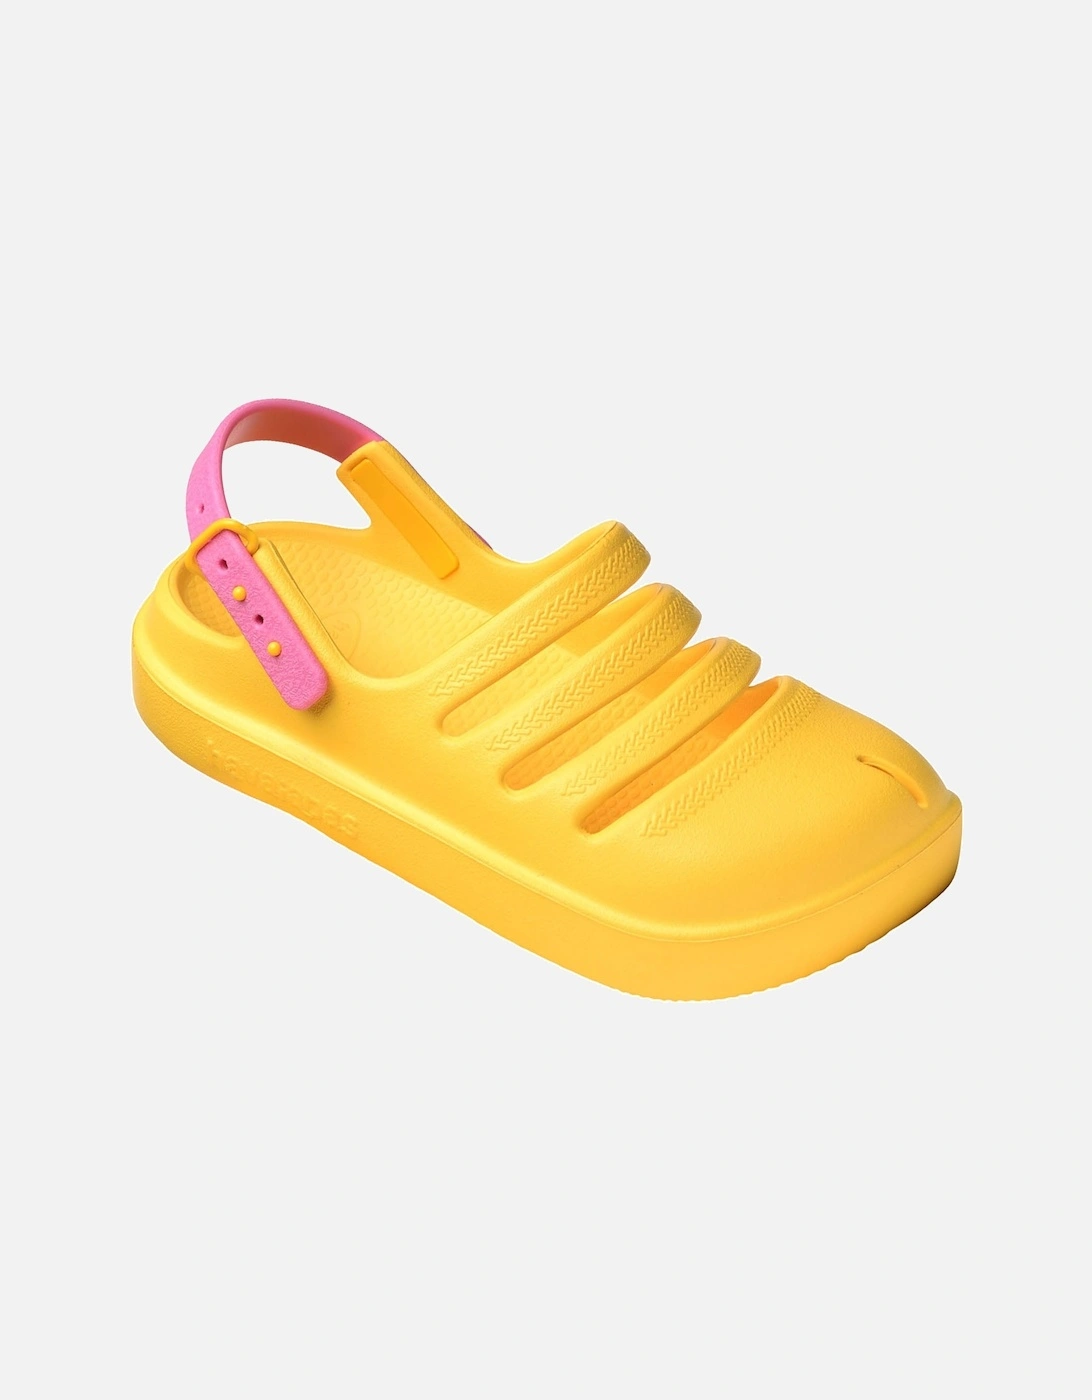 Kids Childrens Rubber Clogs, 27 of 26